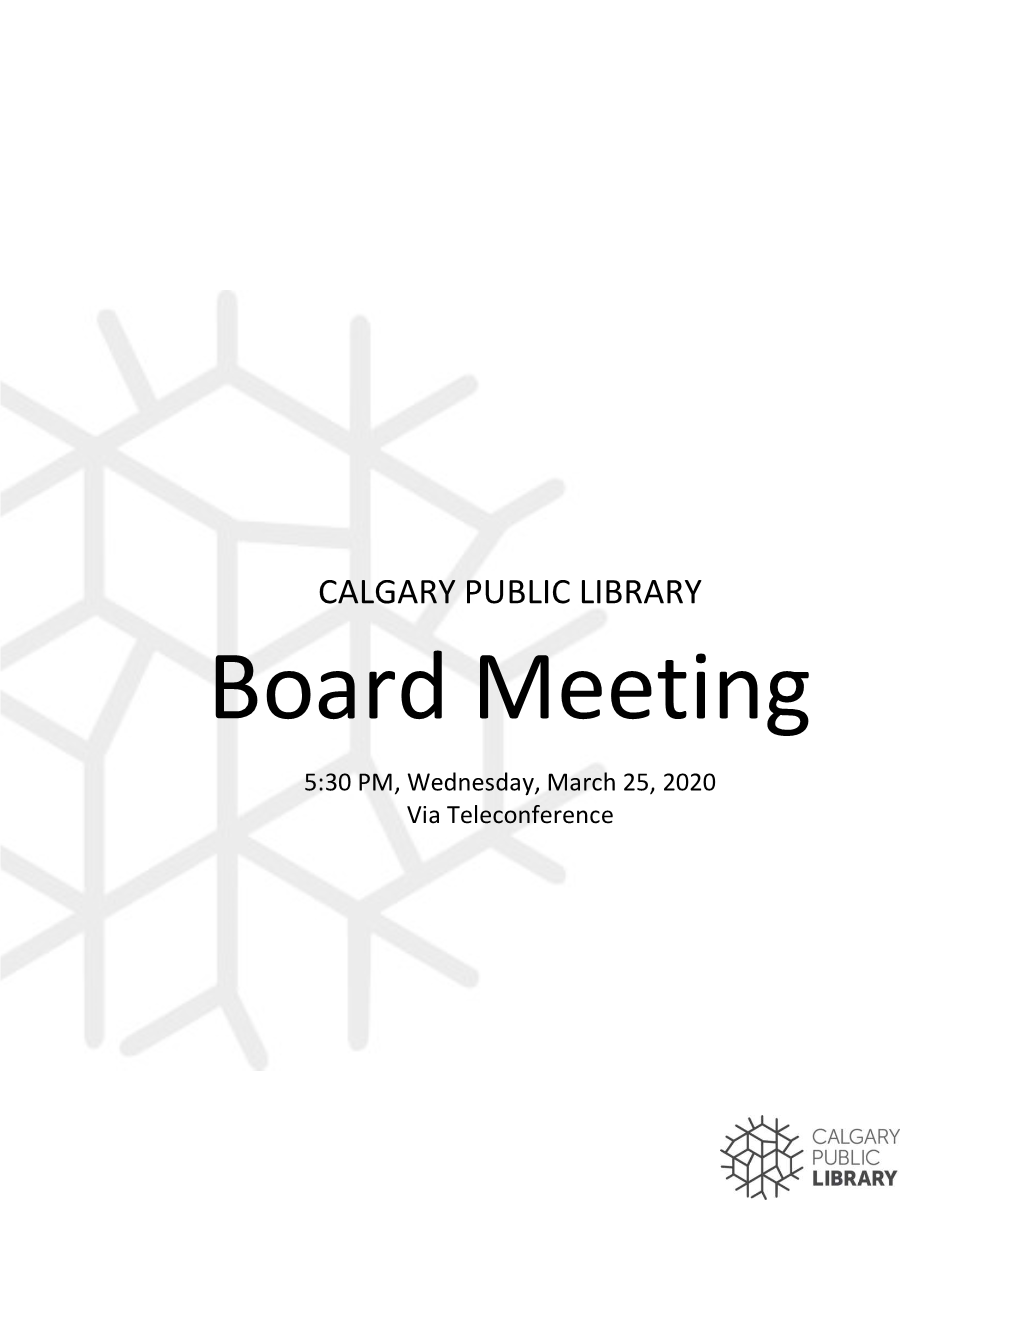 Board Meeting 5:30 PM, Wednesday, March 25, 2020 Via Teleconference